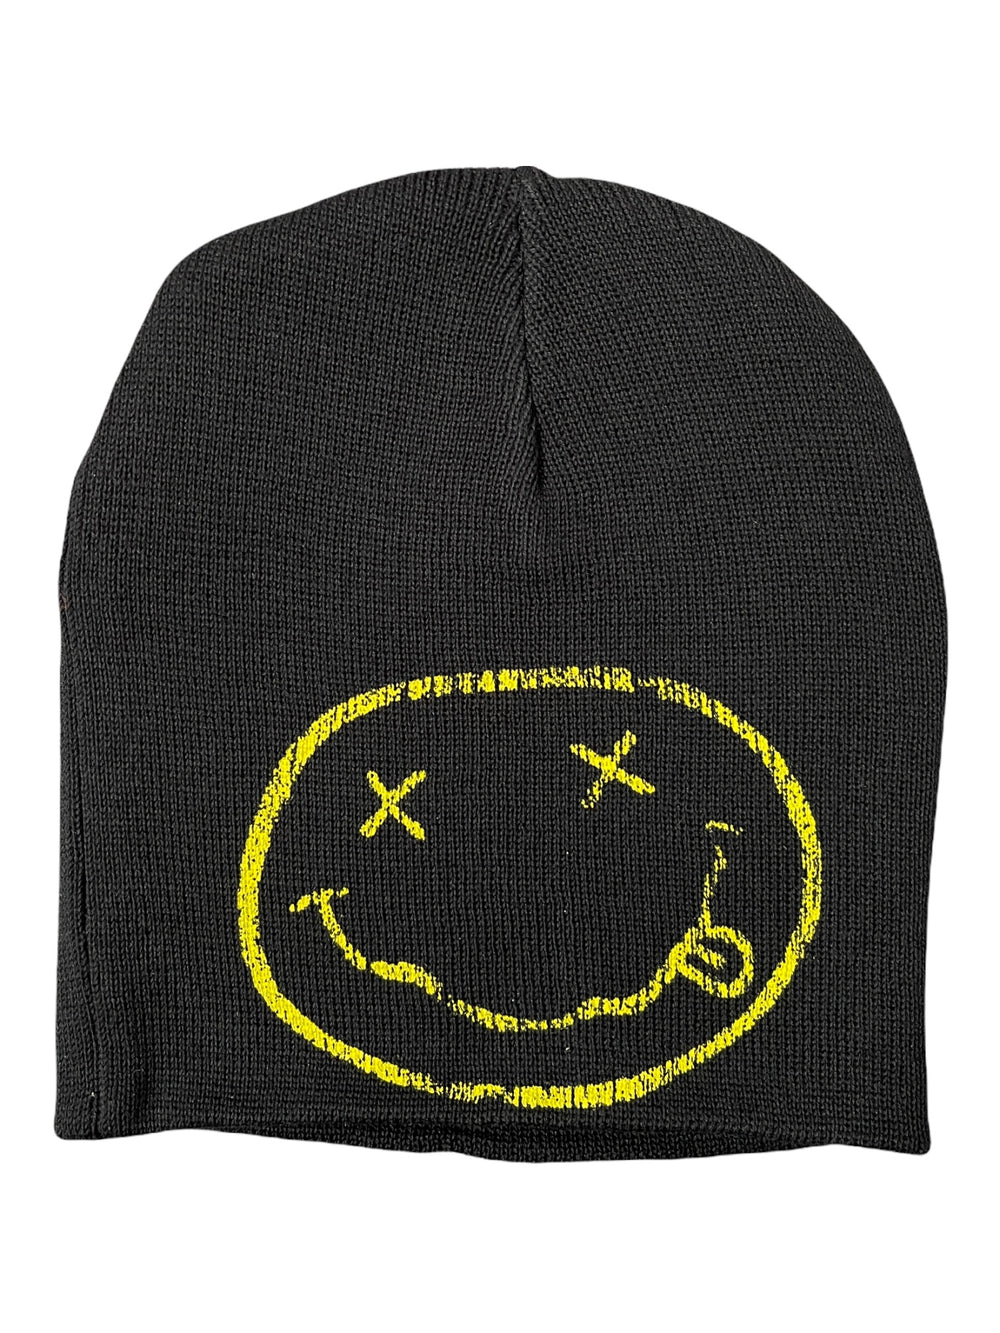 Nirvana - Happy Face  & Name Embroidery Official Beanie Hat One Size Fits All NEW